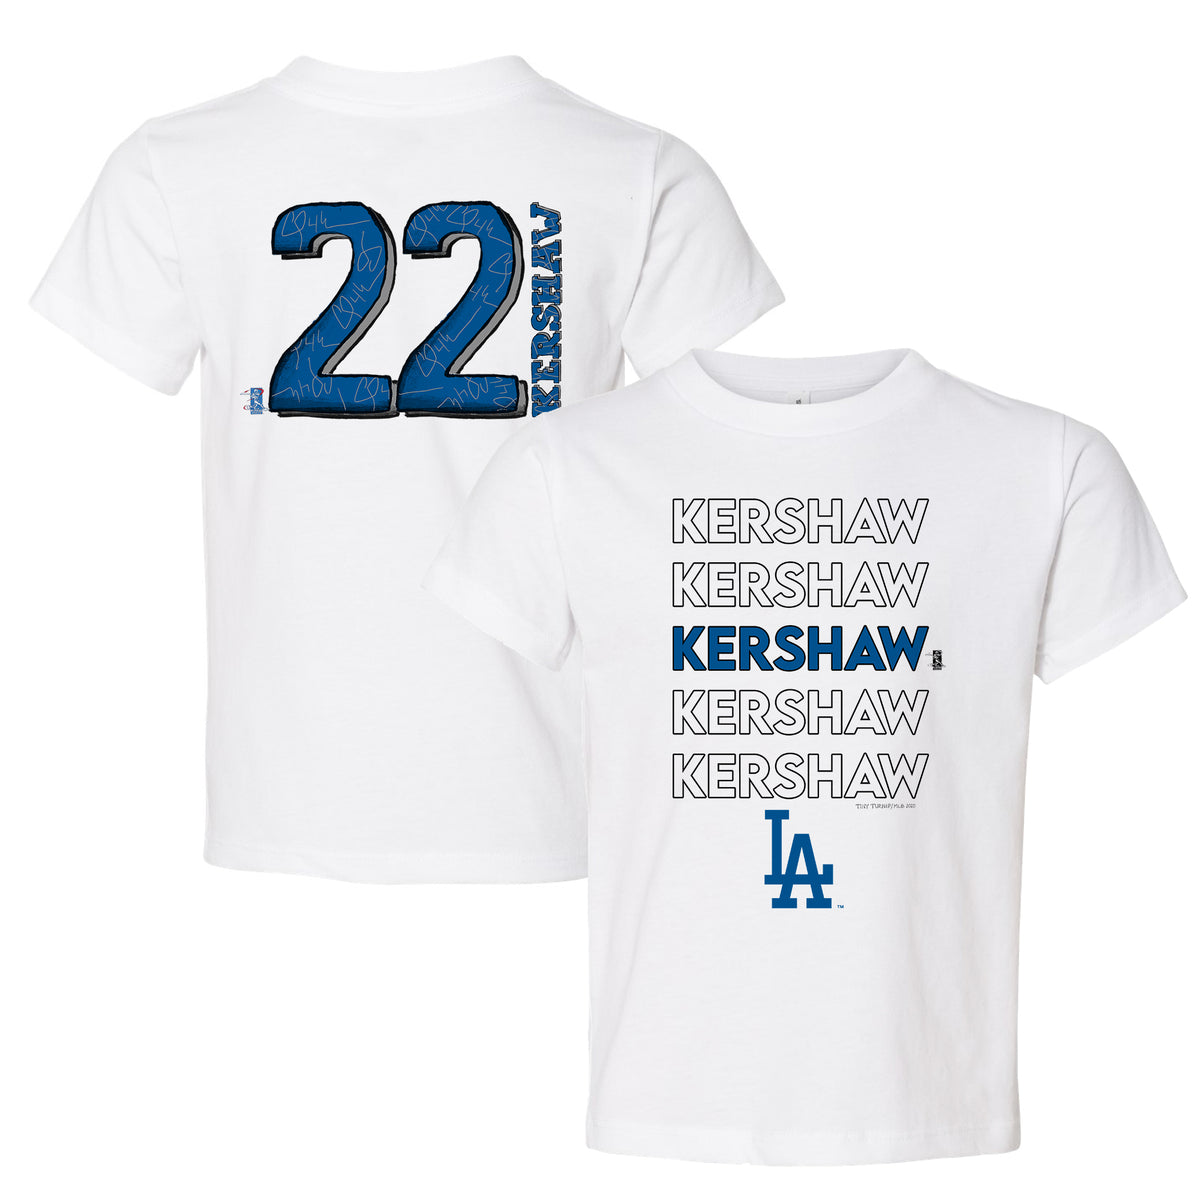 Clayton Kershaw Youth Jersey - La Dodgers Youth Home Jersey